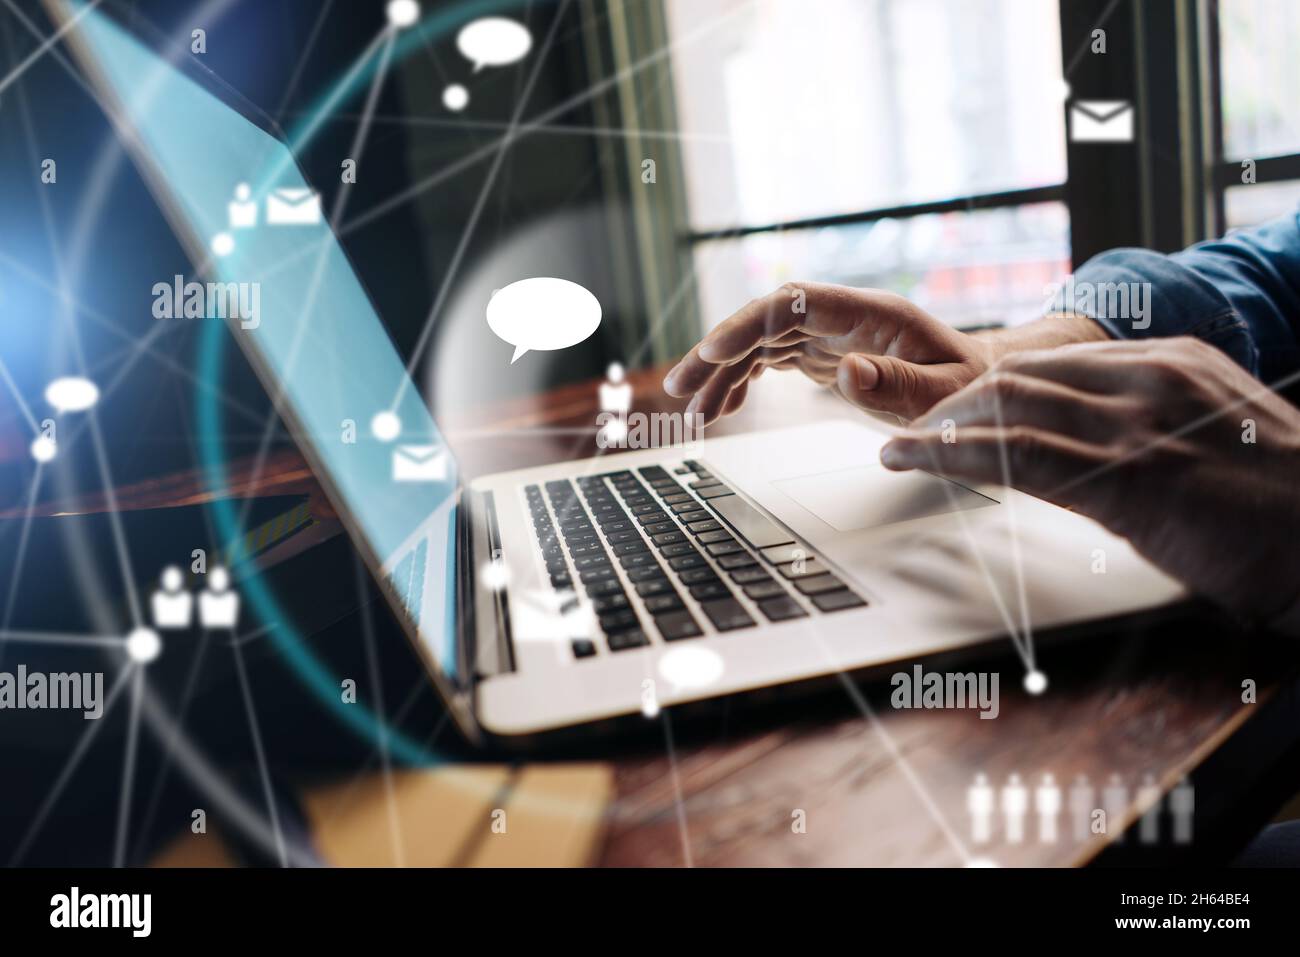 Close-up photo of male hands with laptop. Man working remotely at home. Concept of networking or remote work. Global business network. Stock Photo